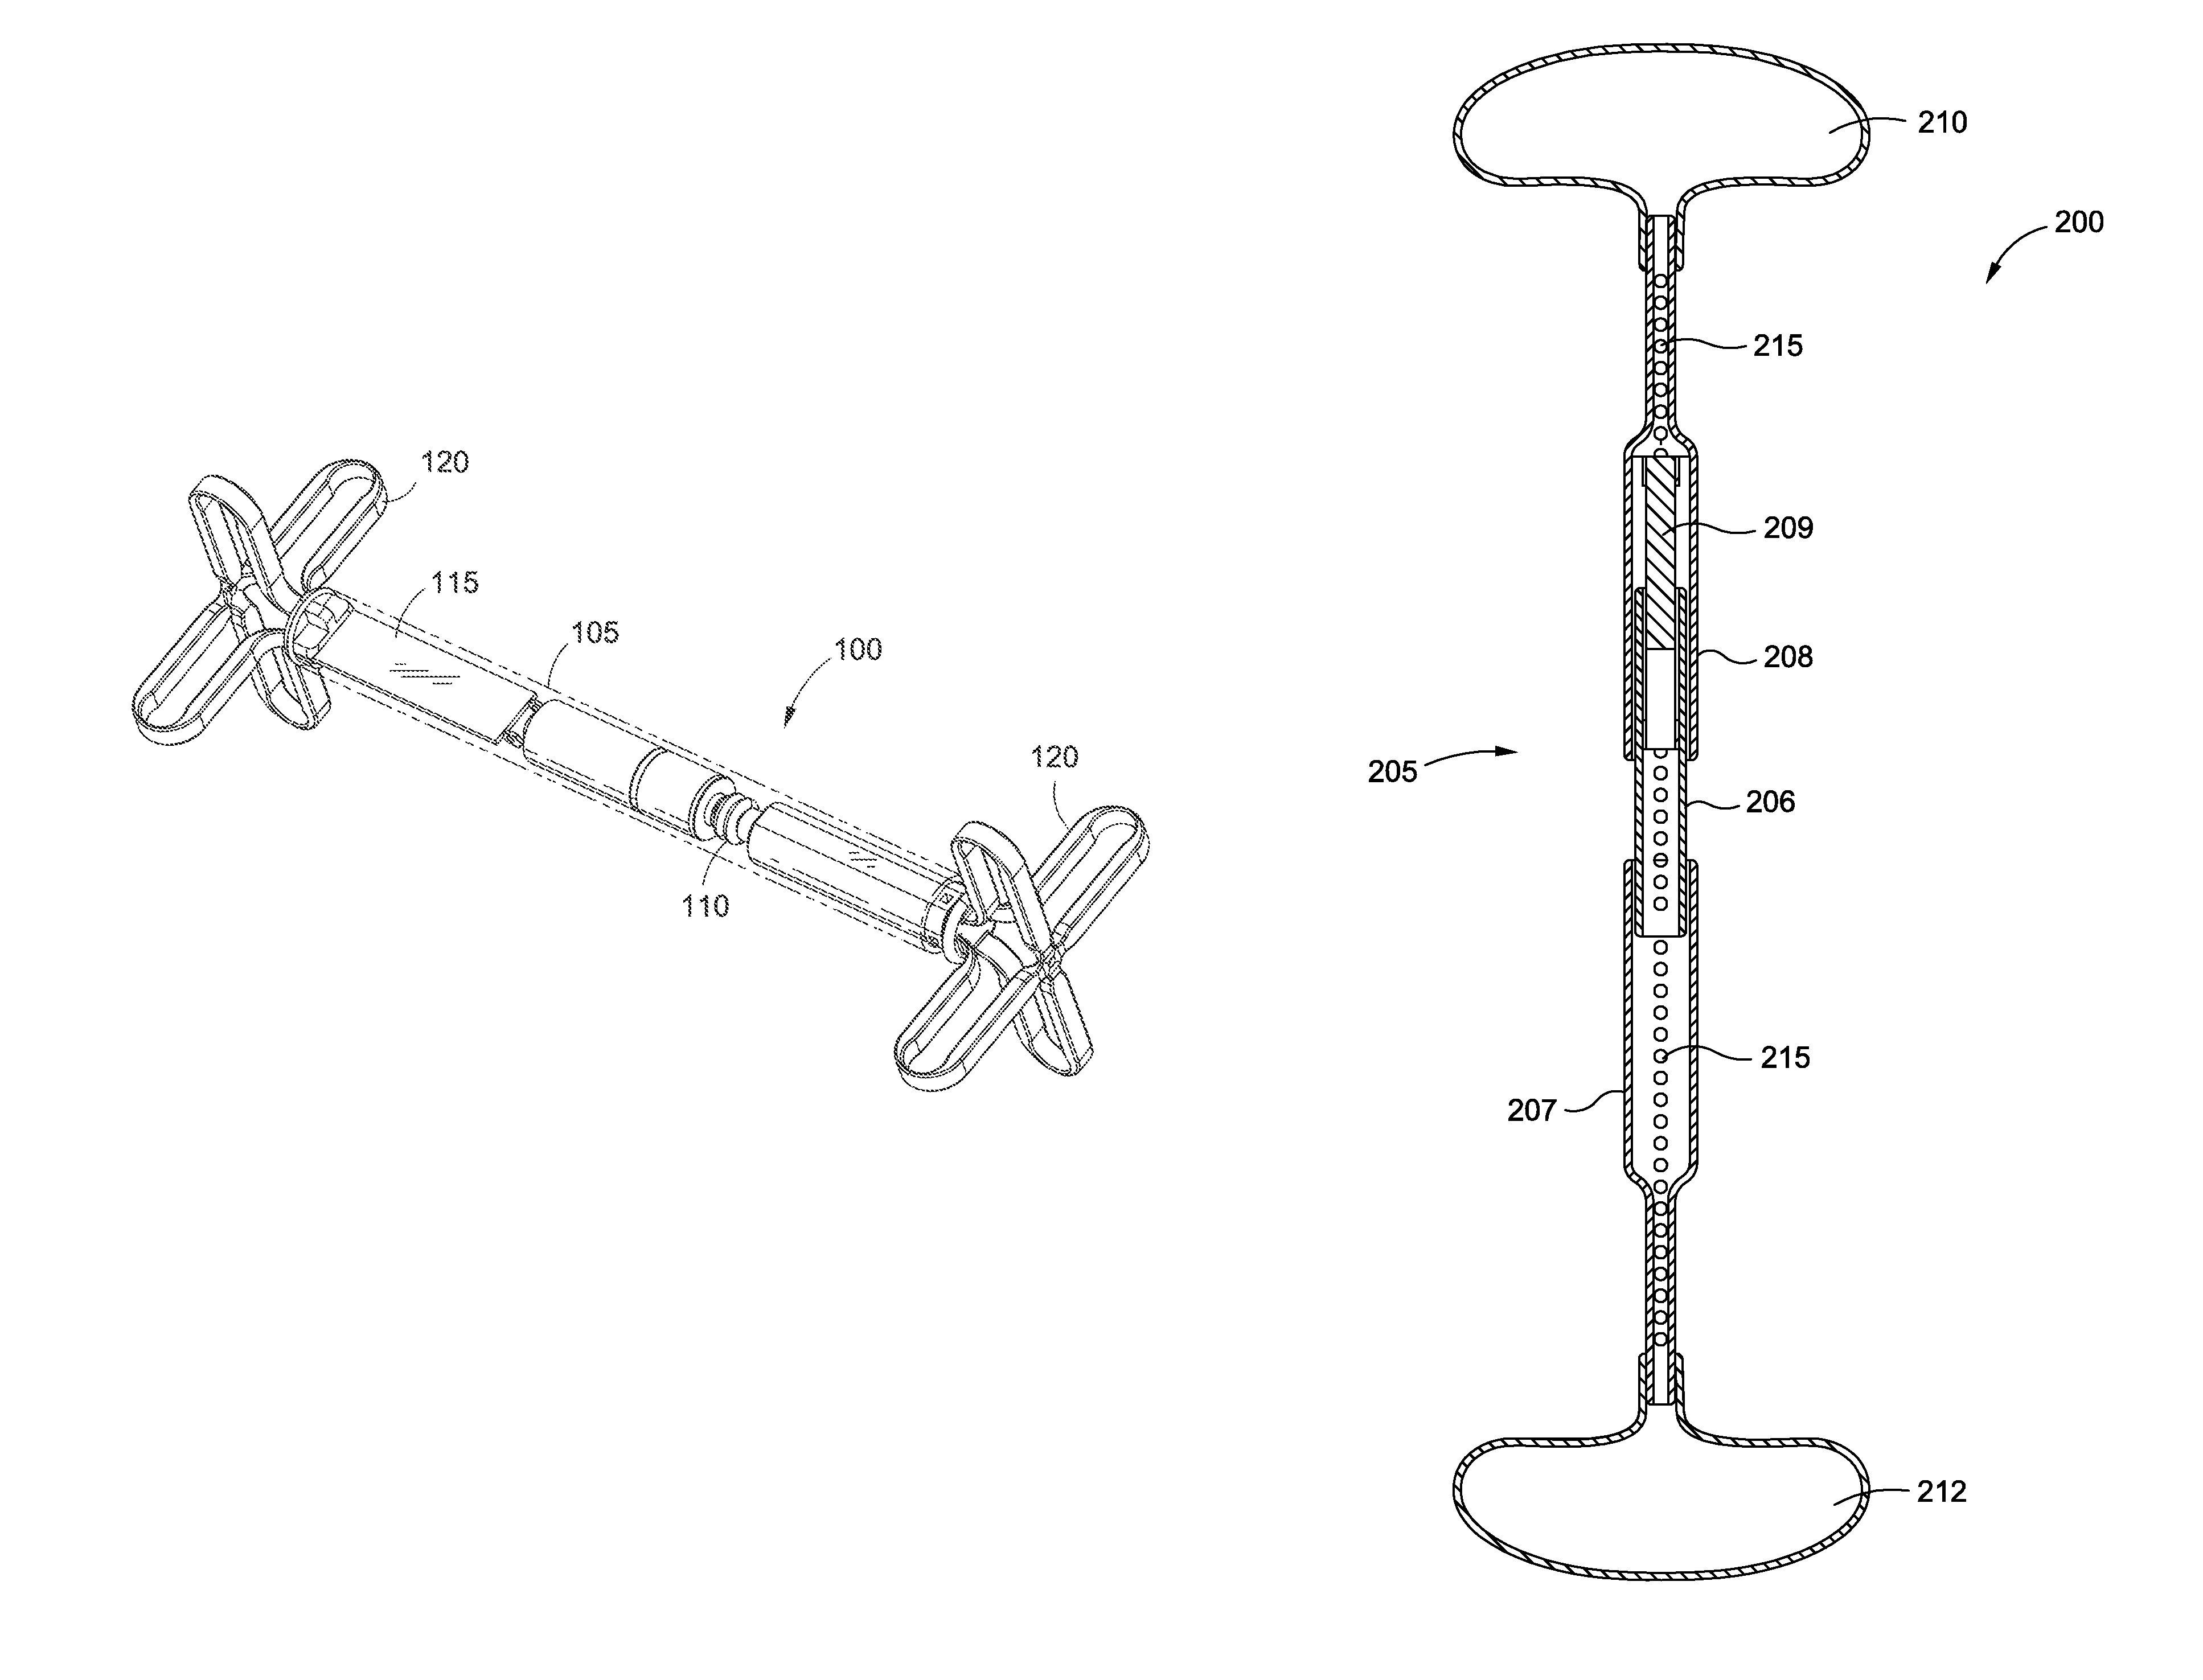 Variable size intragastric implant devices